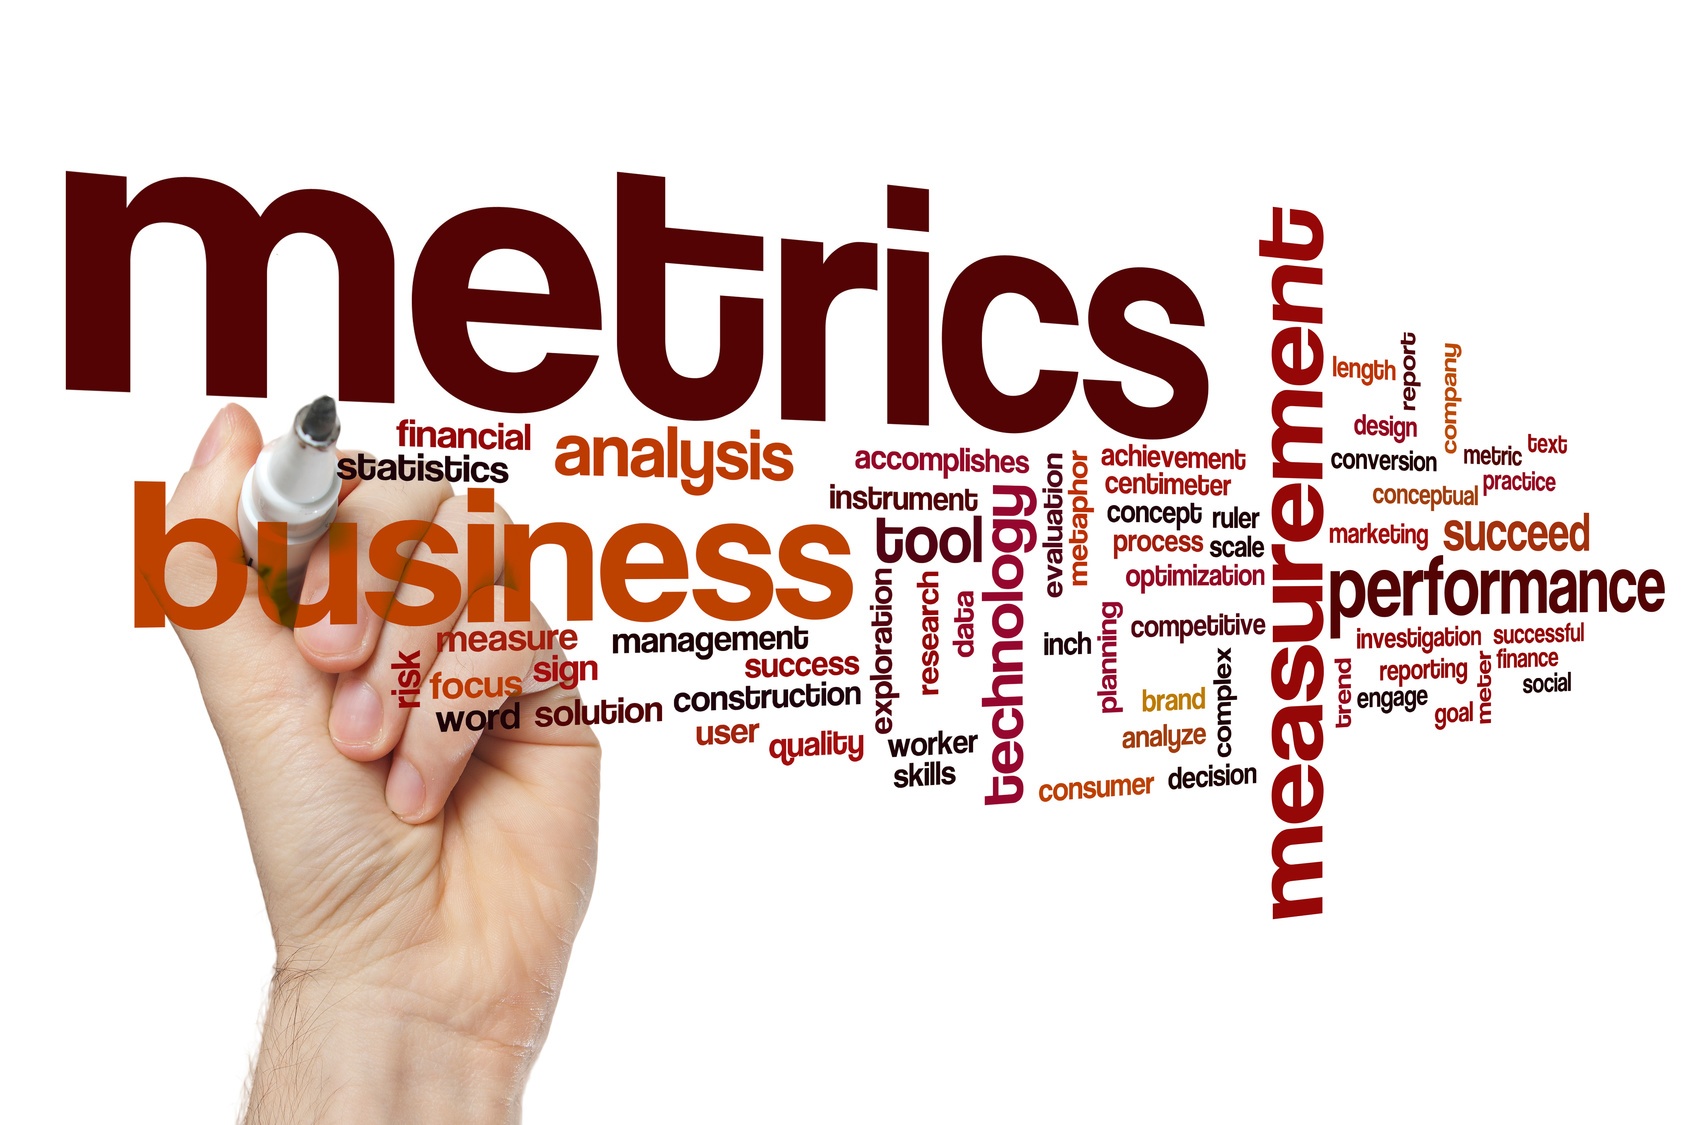 Quick Tip: Make These Marketing Metrics Part of Your Next Quarterly Report